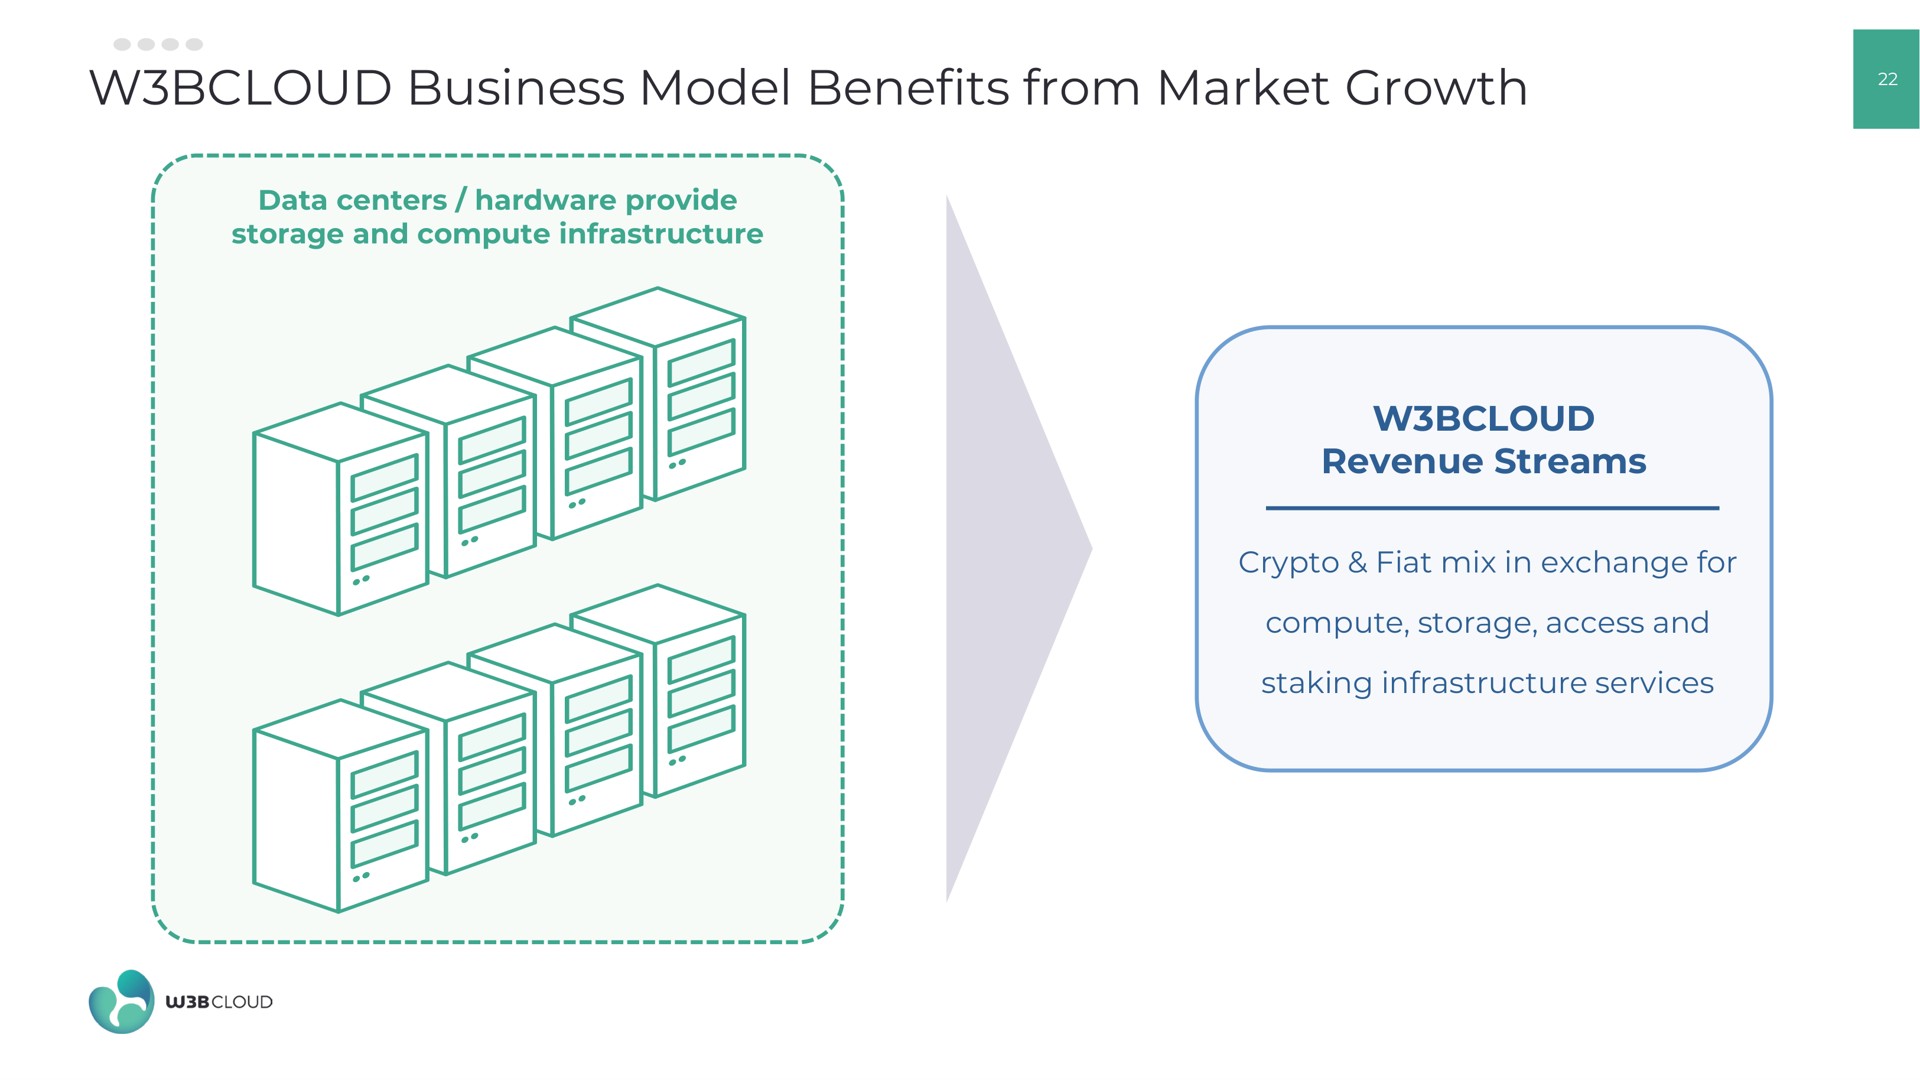 business model benefits from market growth | W3BCLOUD